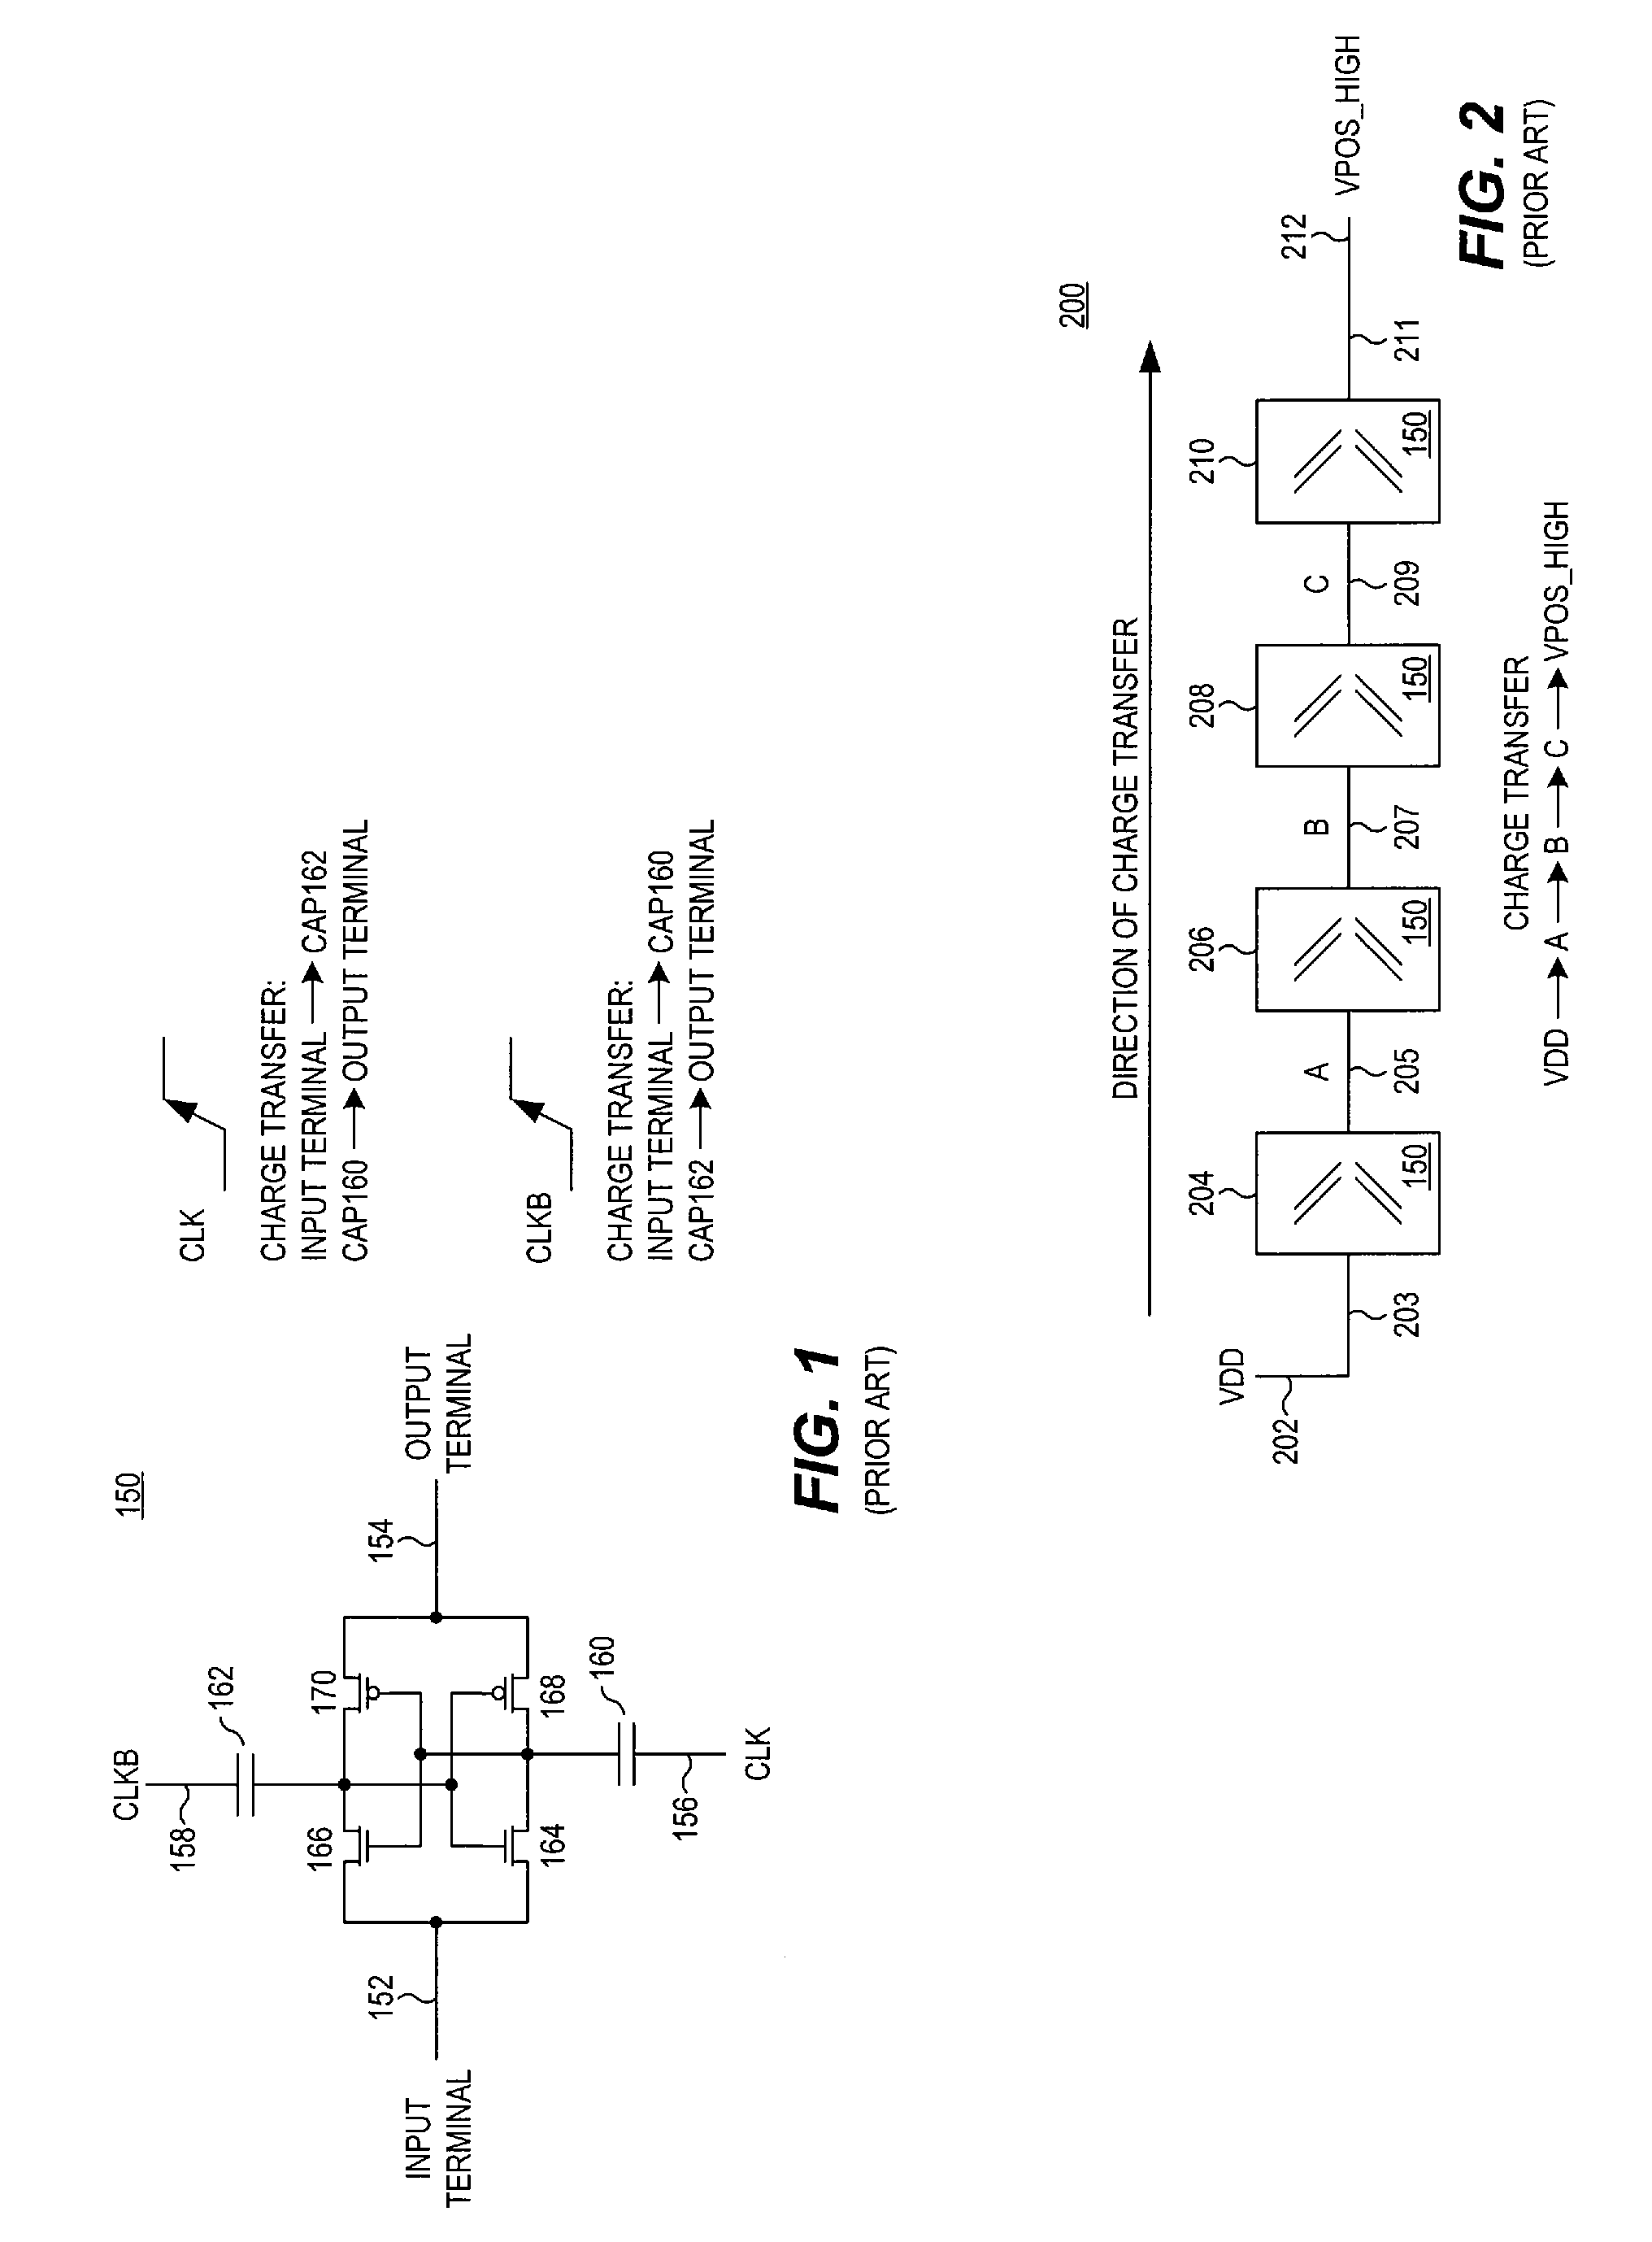 Method for using a multiple polarity reversible charge pump circuit